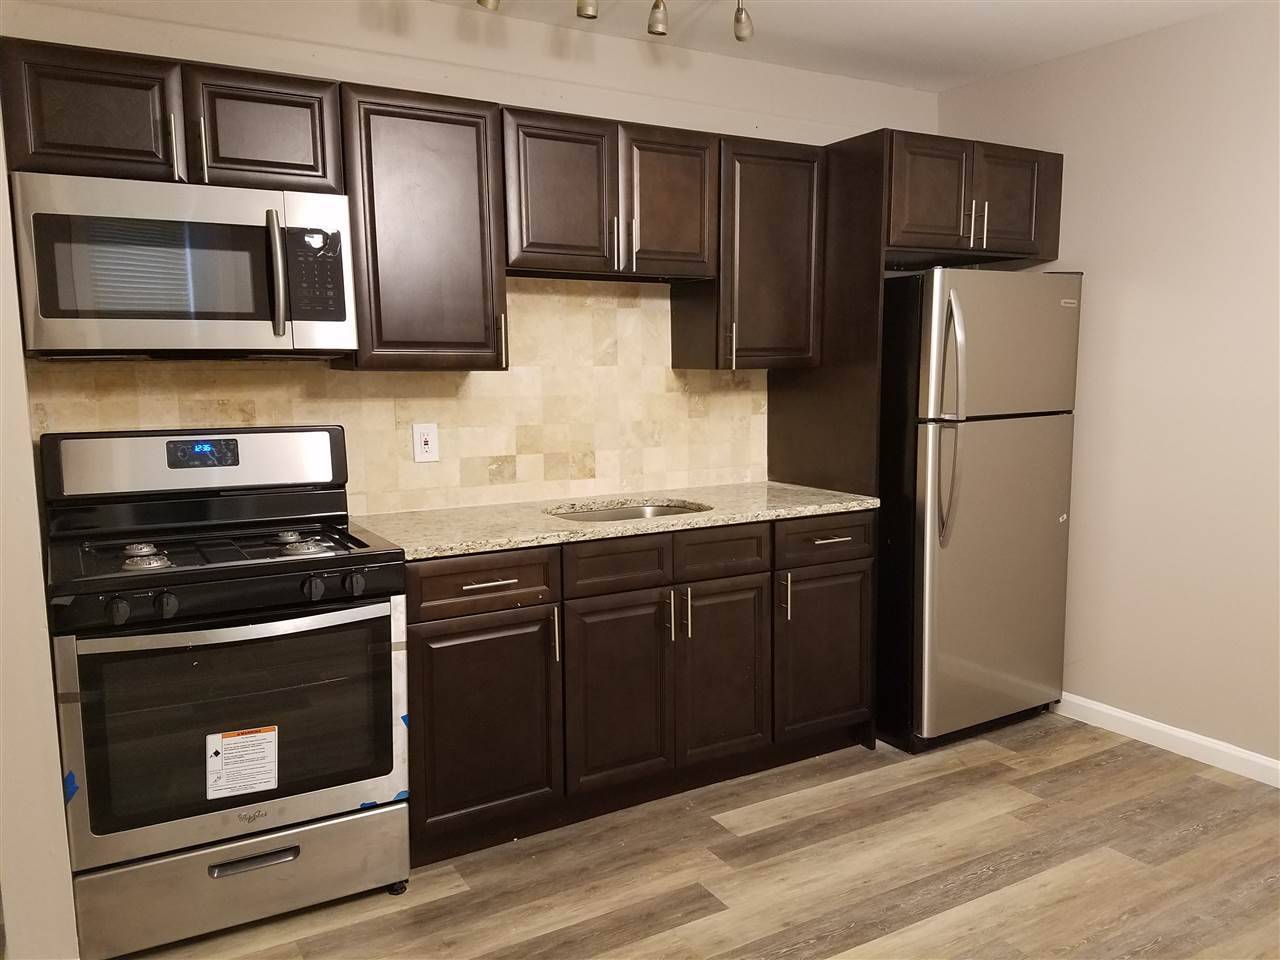 Brand new recently renovated spacious 2 bedrooms/1 bath apt INCLUDE HEAT & HOT WATER